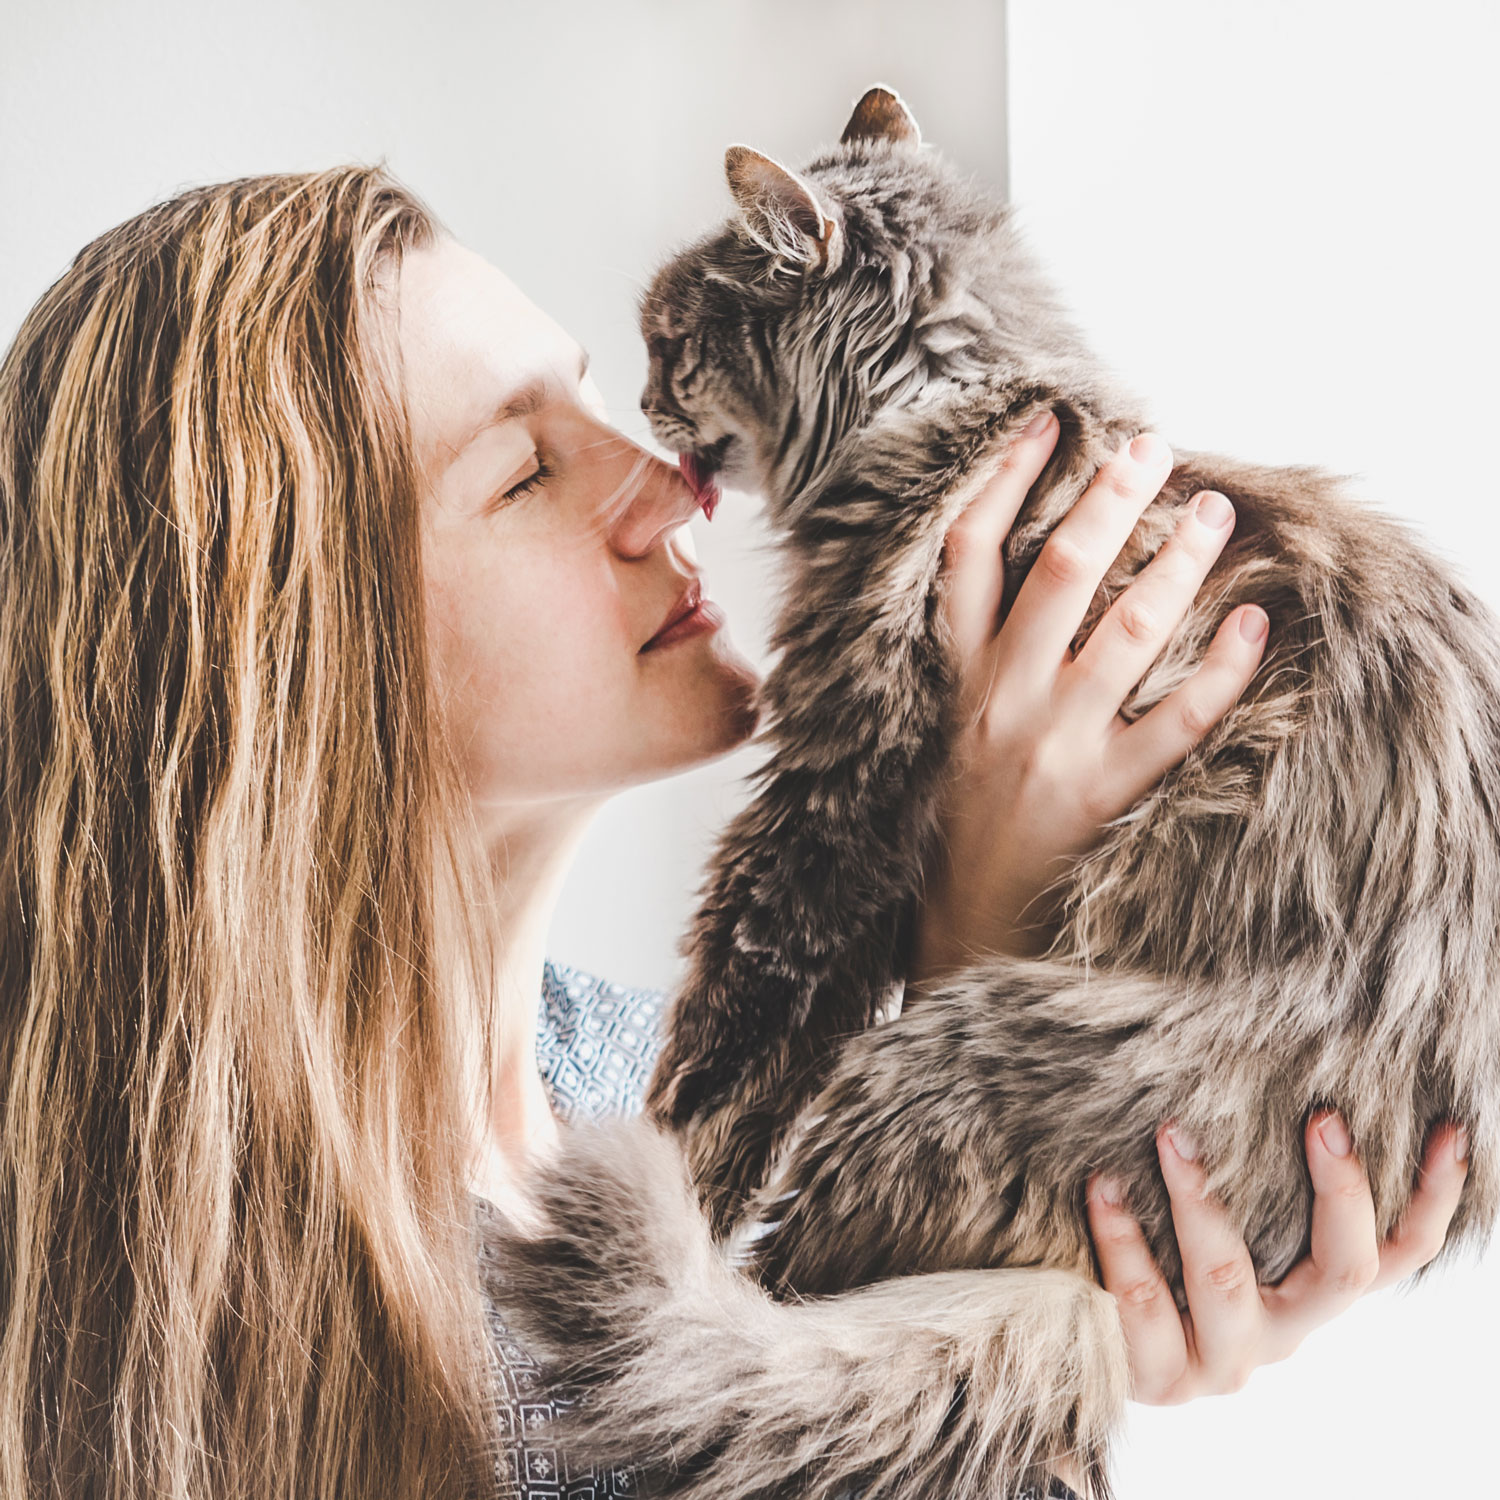 A woman holding her cat close to her nose and licking her